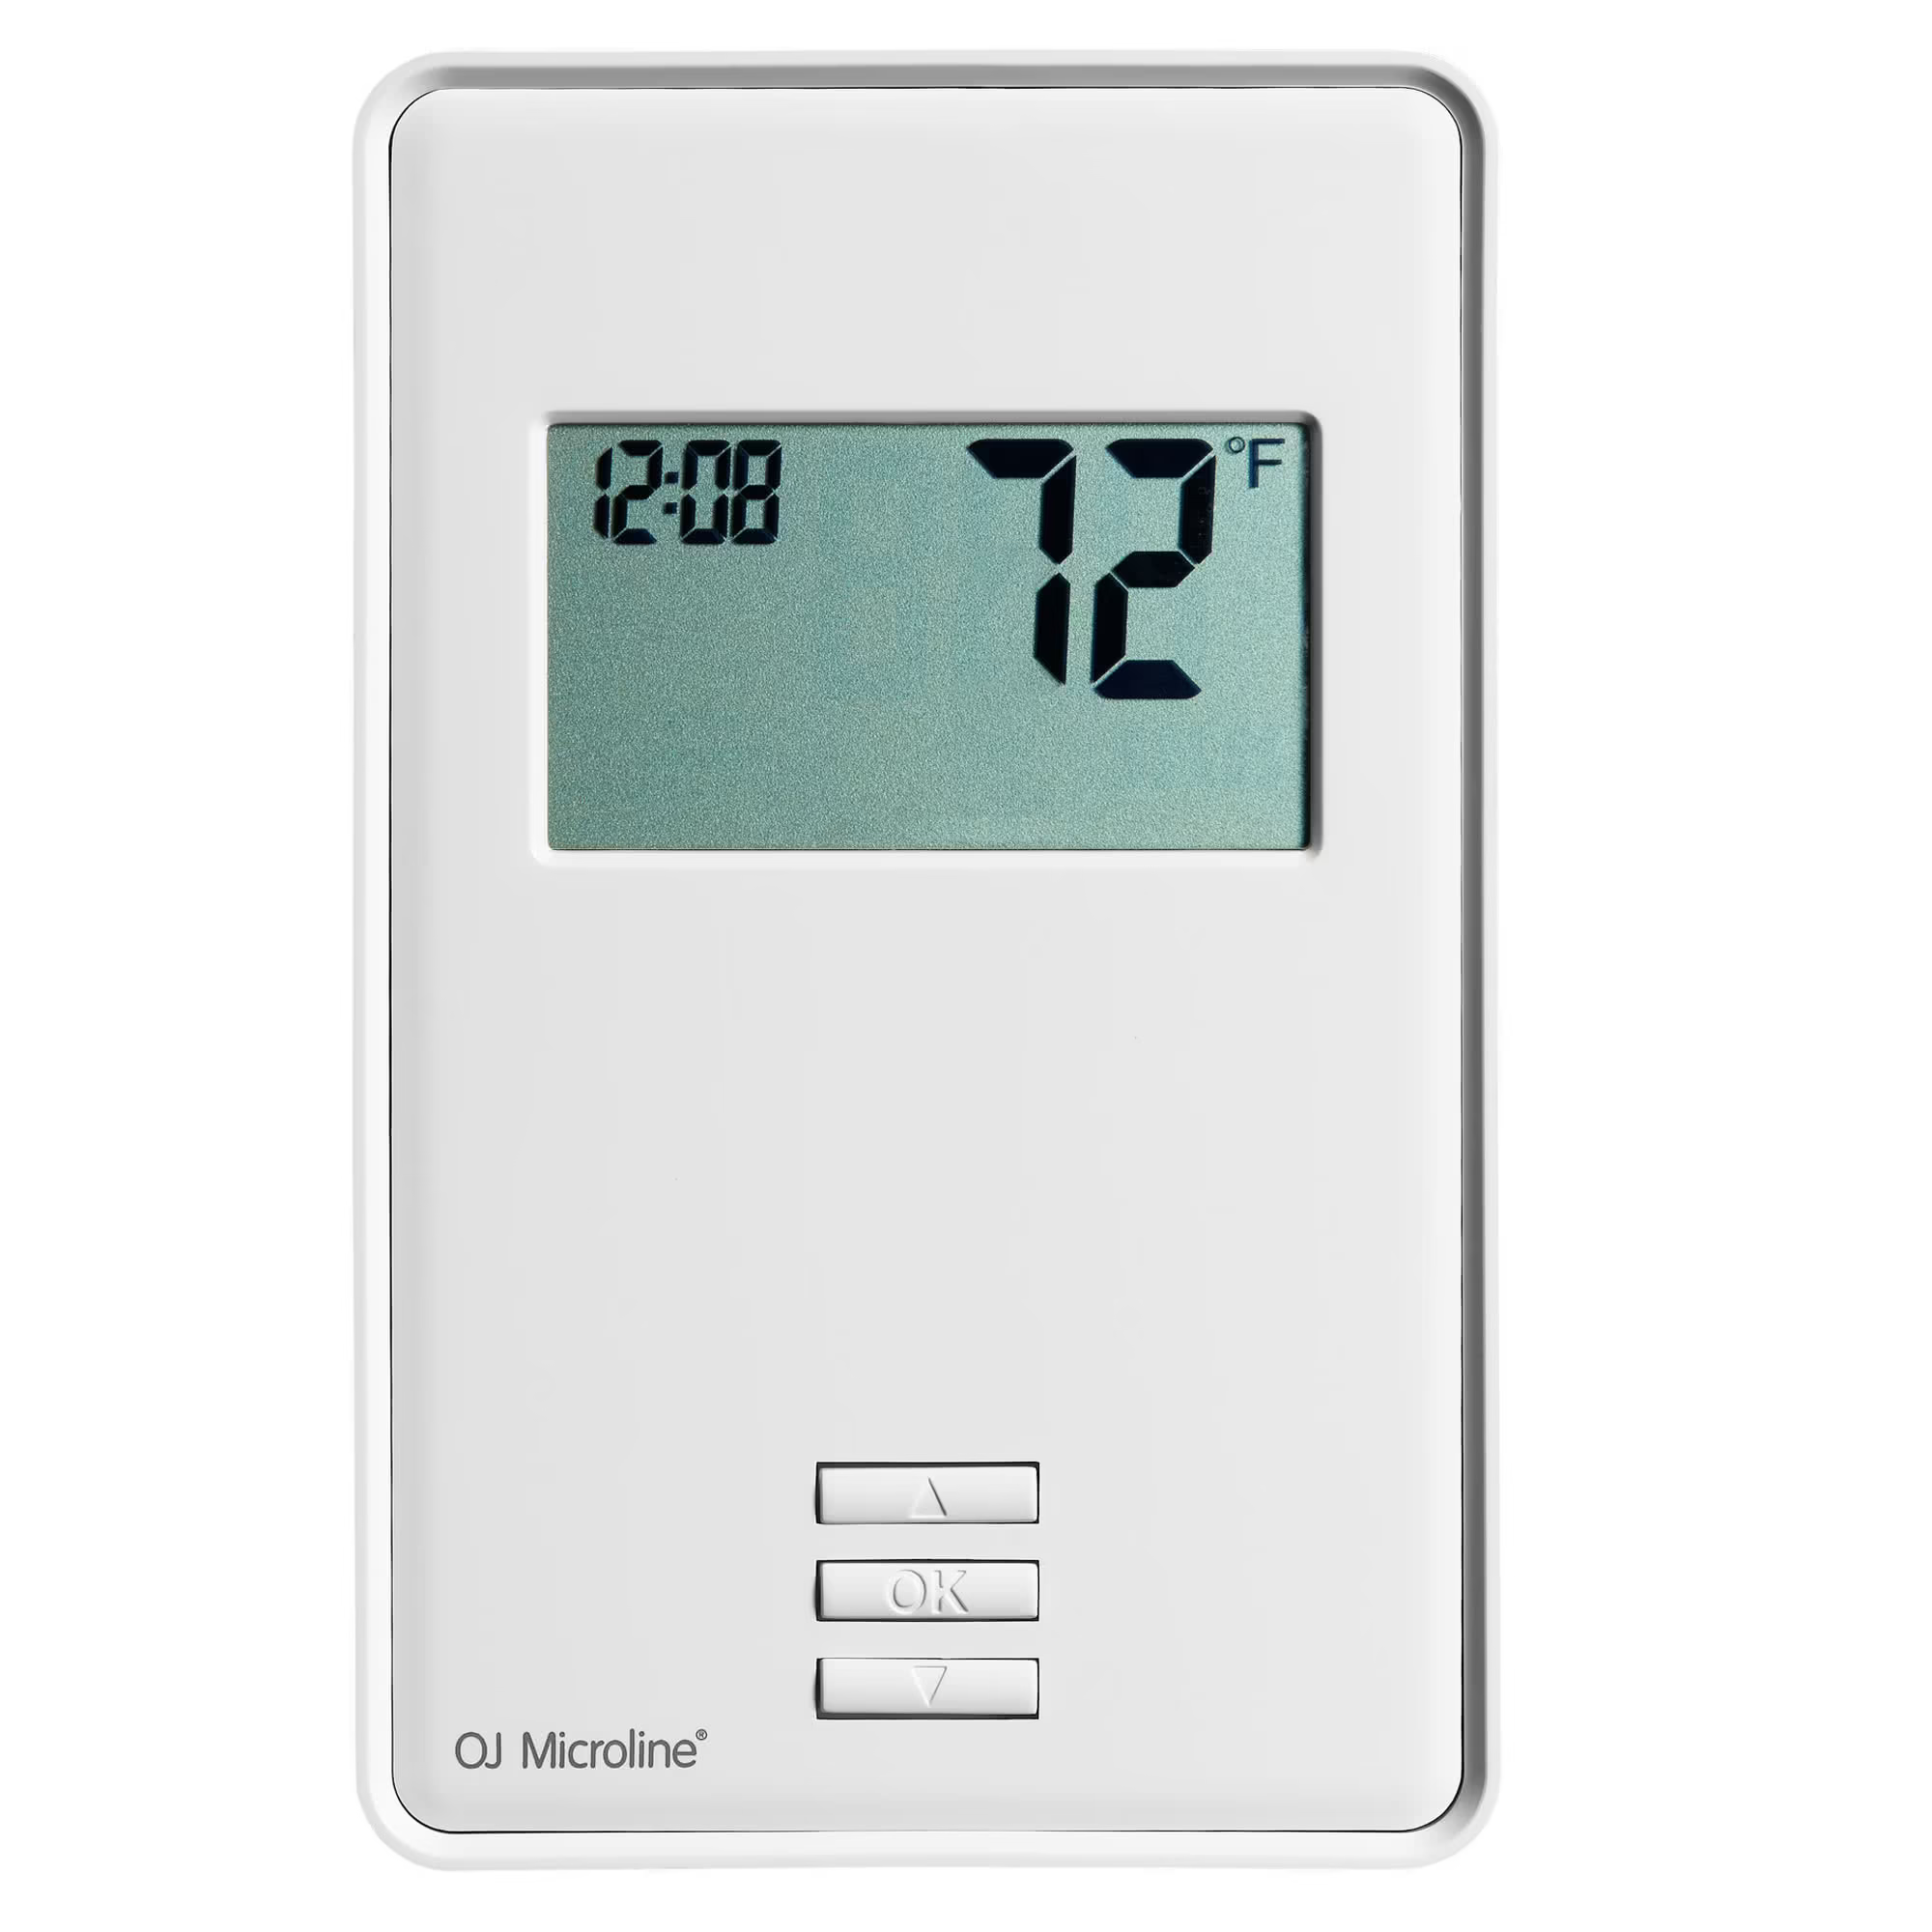 UTN4-4999 - Non-Programmable Thermostat